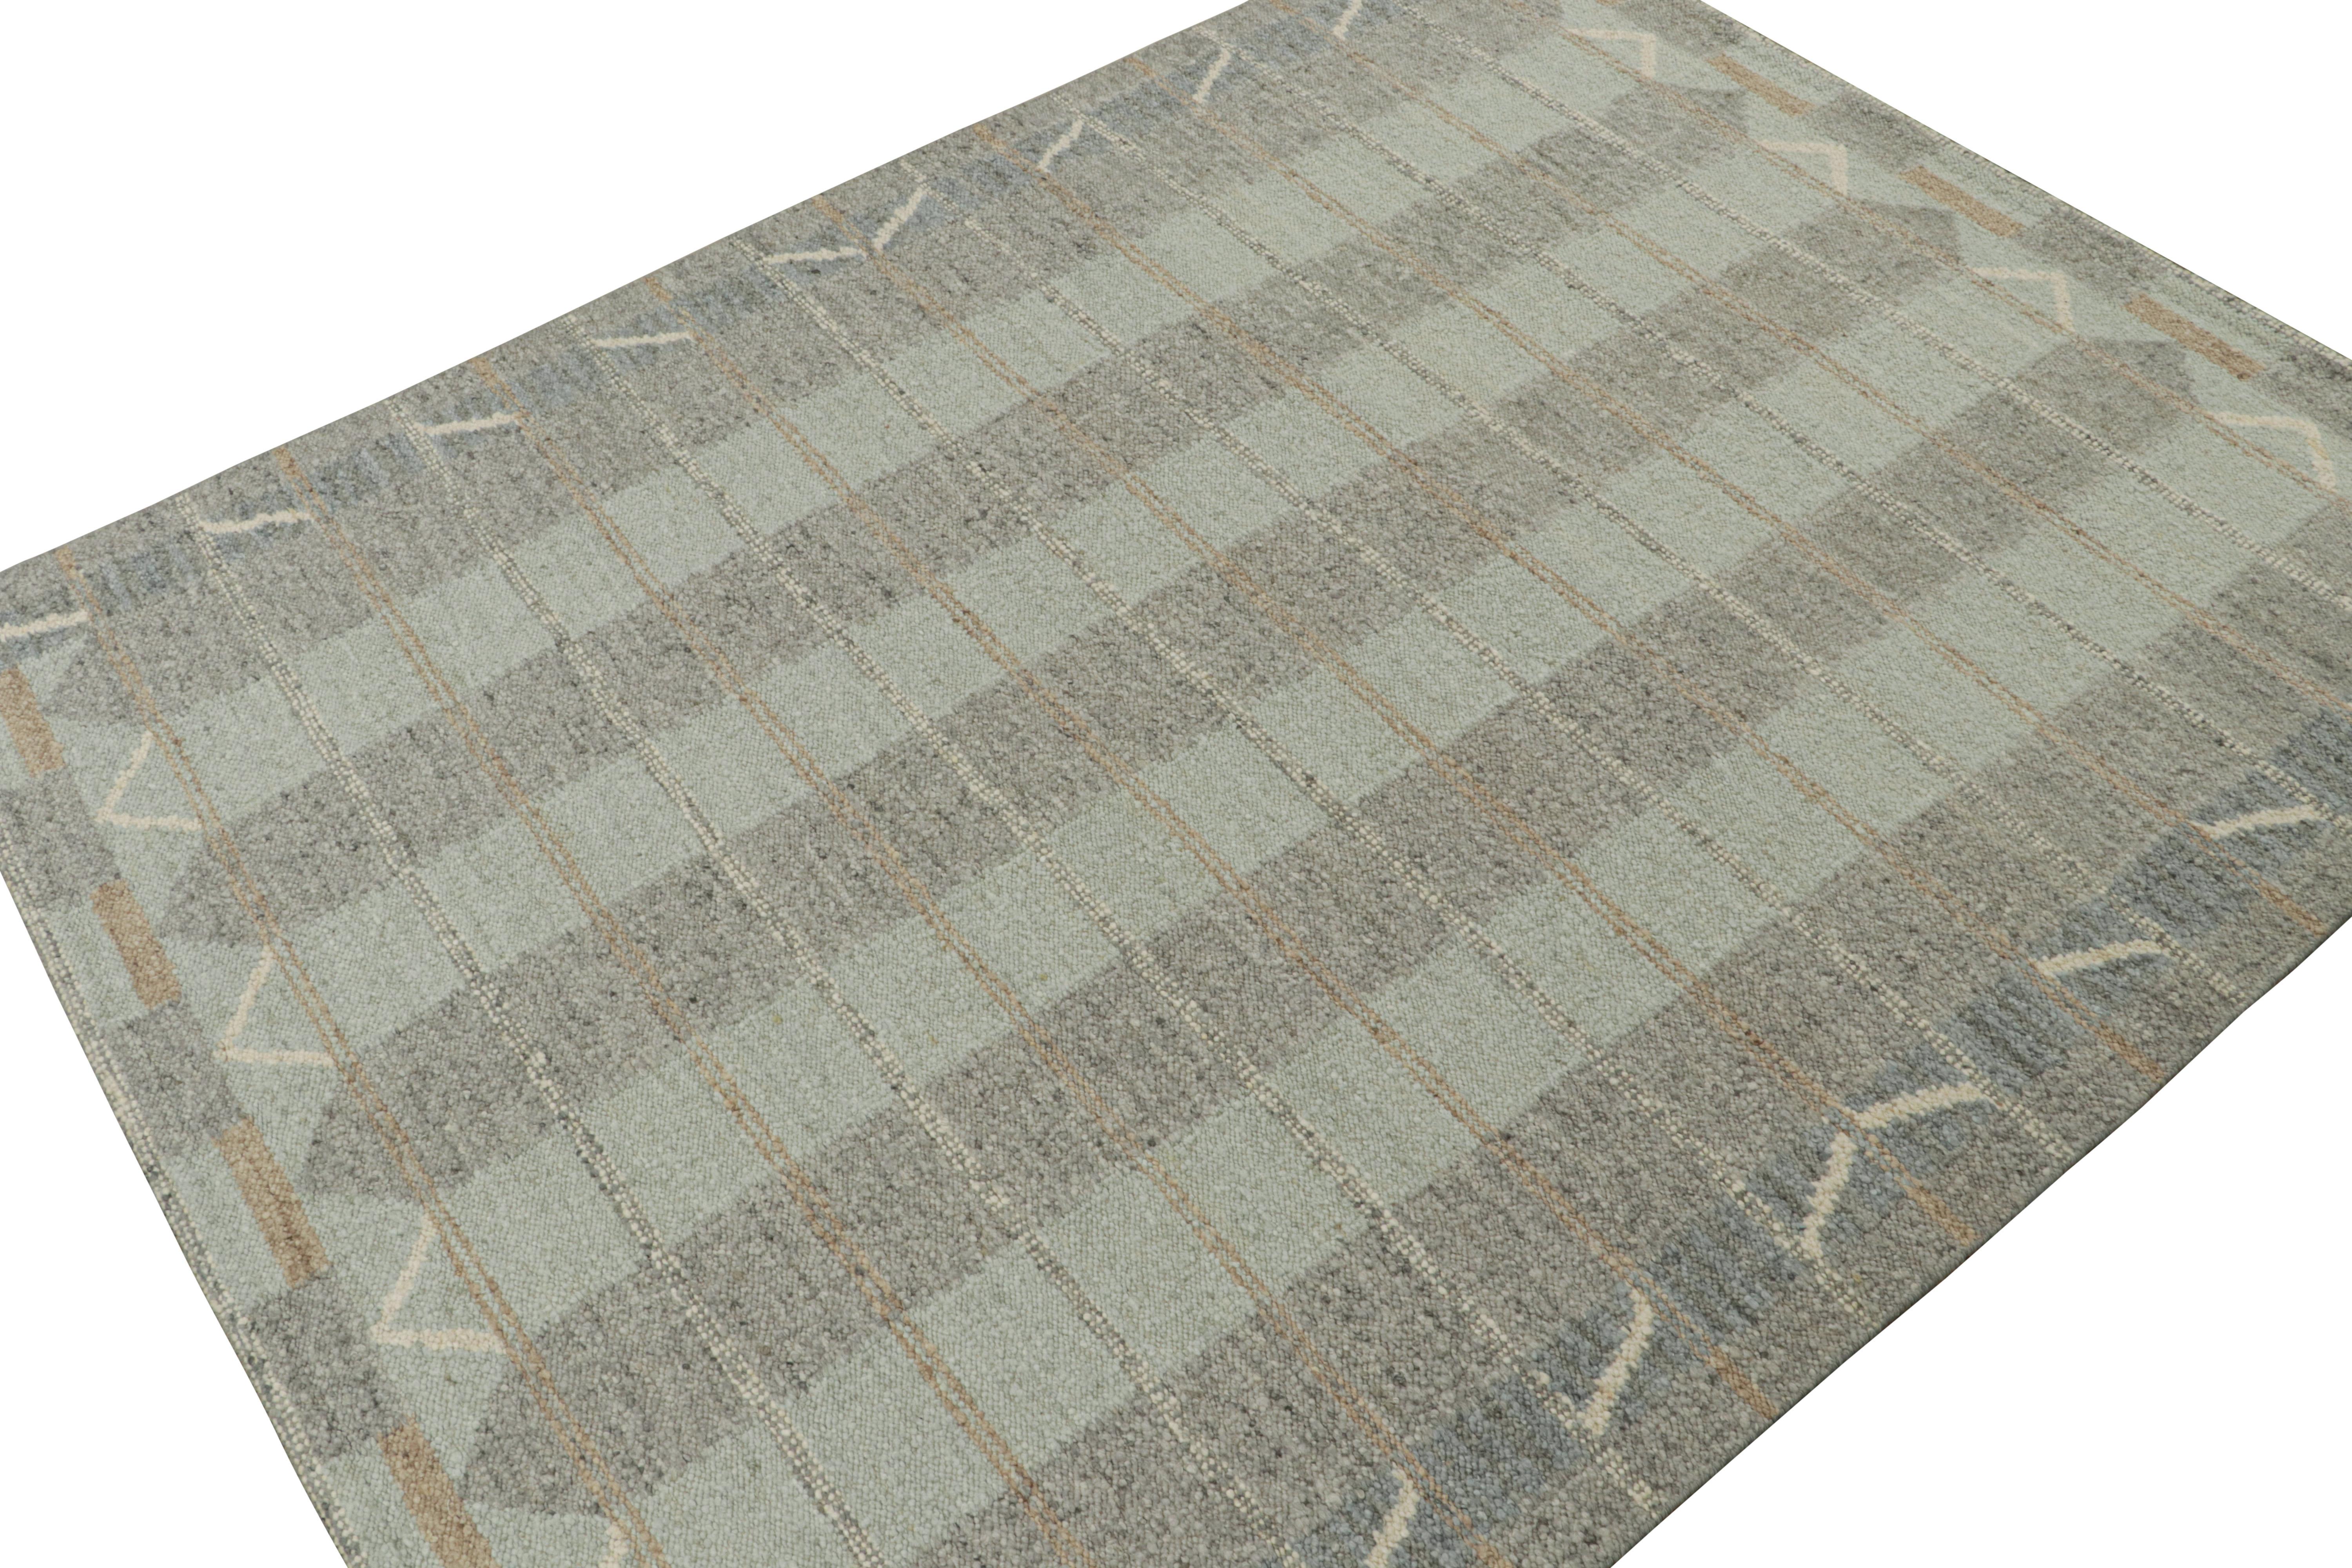 Indian Rug & Kilim’s Scandinavian Style Kilim in Blue & Gray Geometric Patterns For Sale